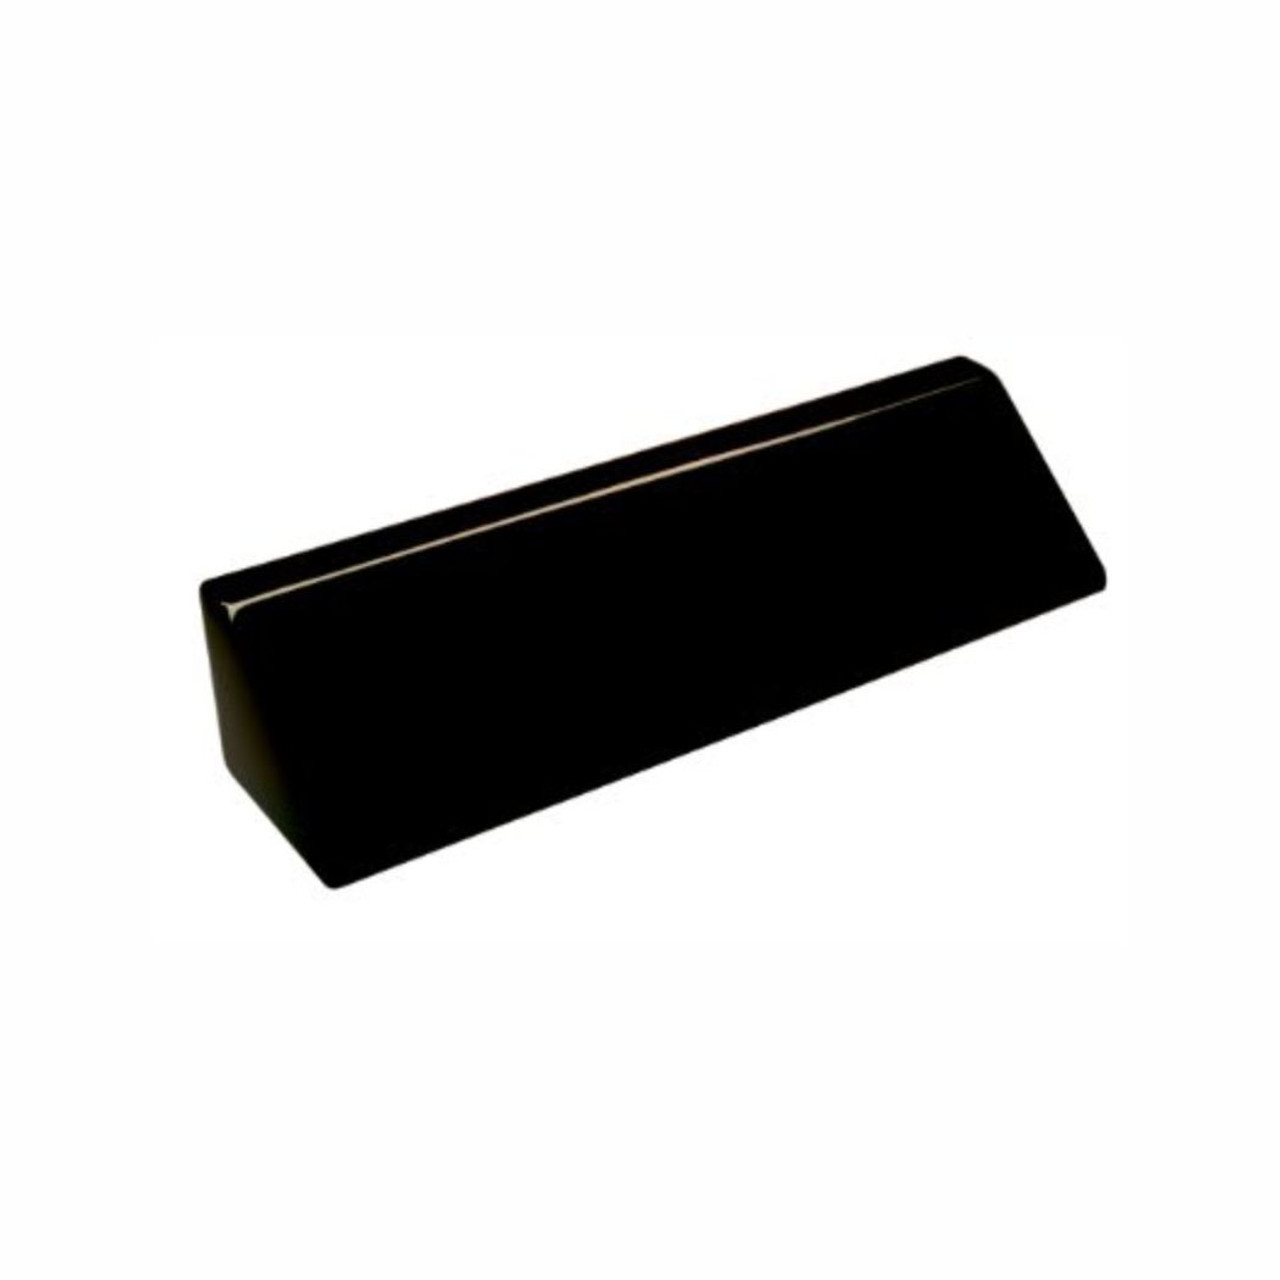 Chevrolet Buick Name Plate with Optional Holder